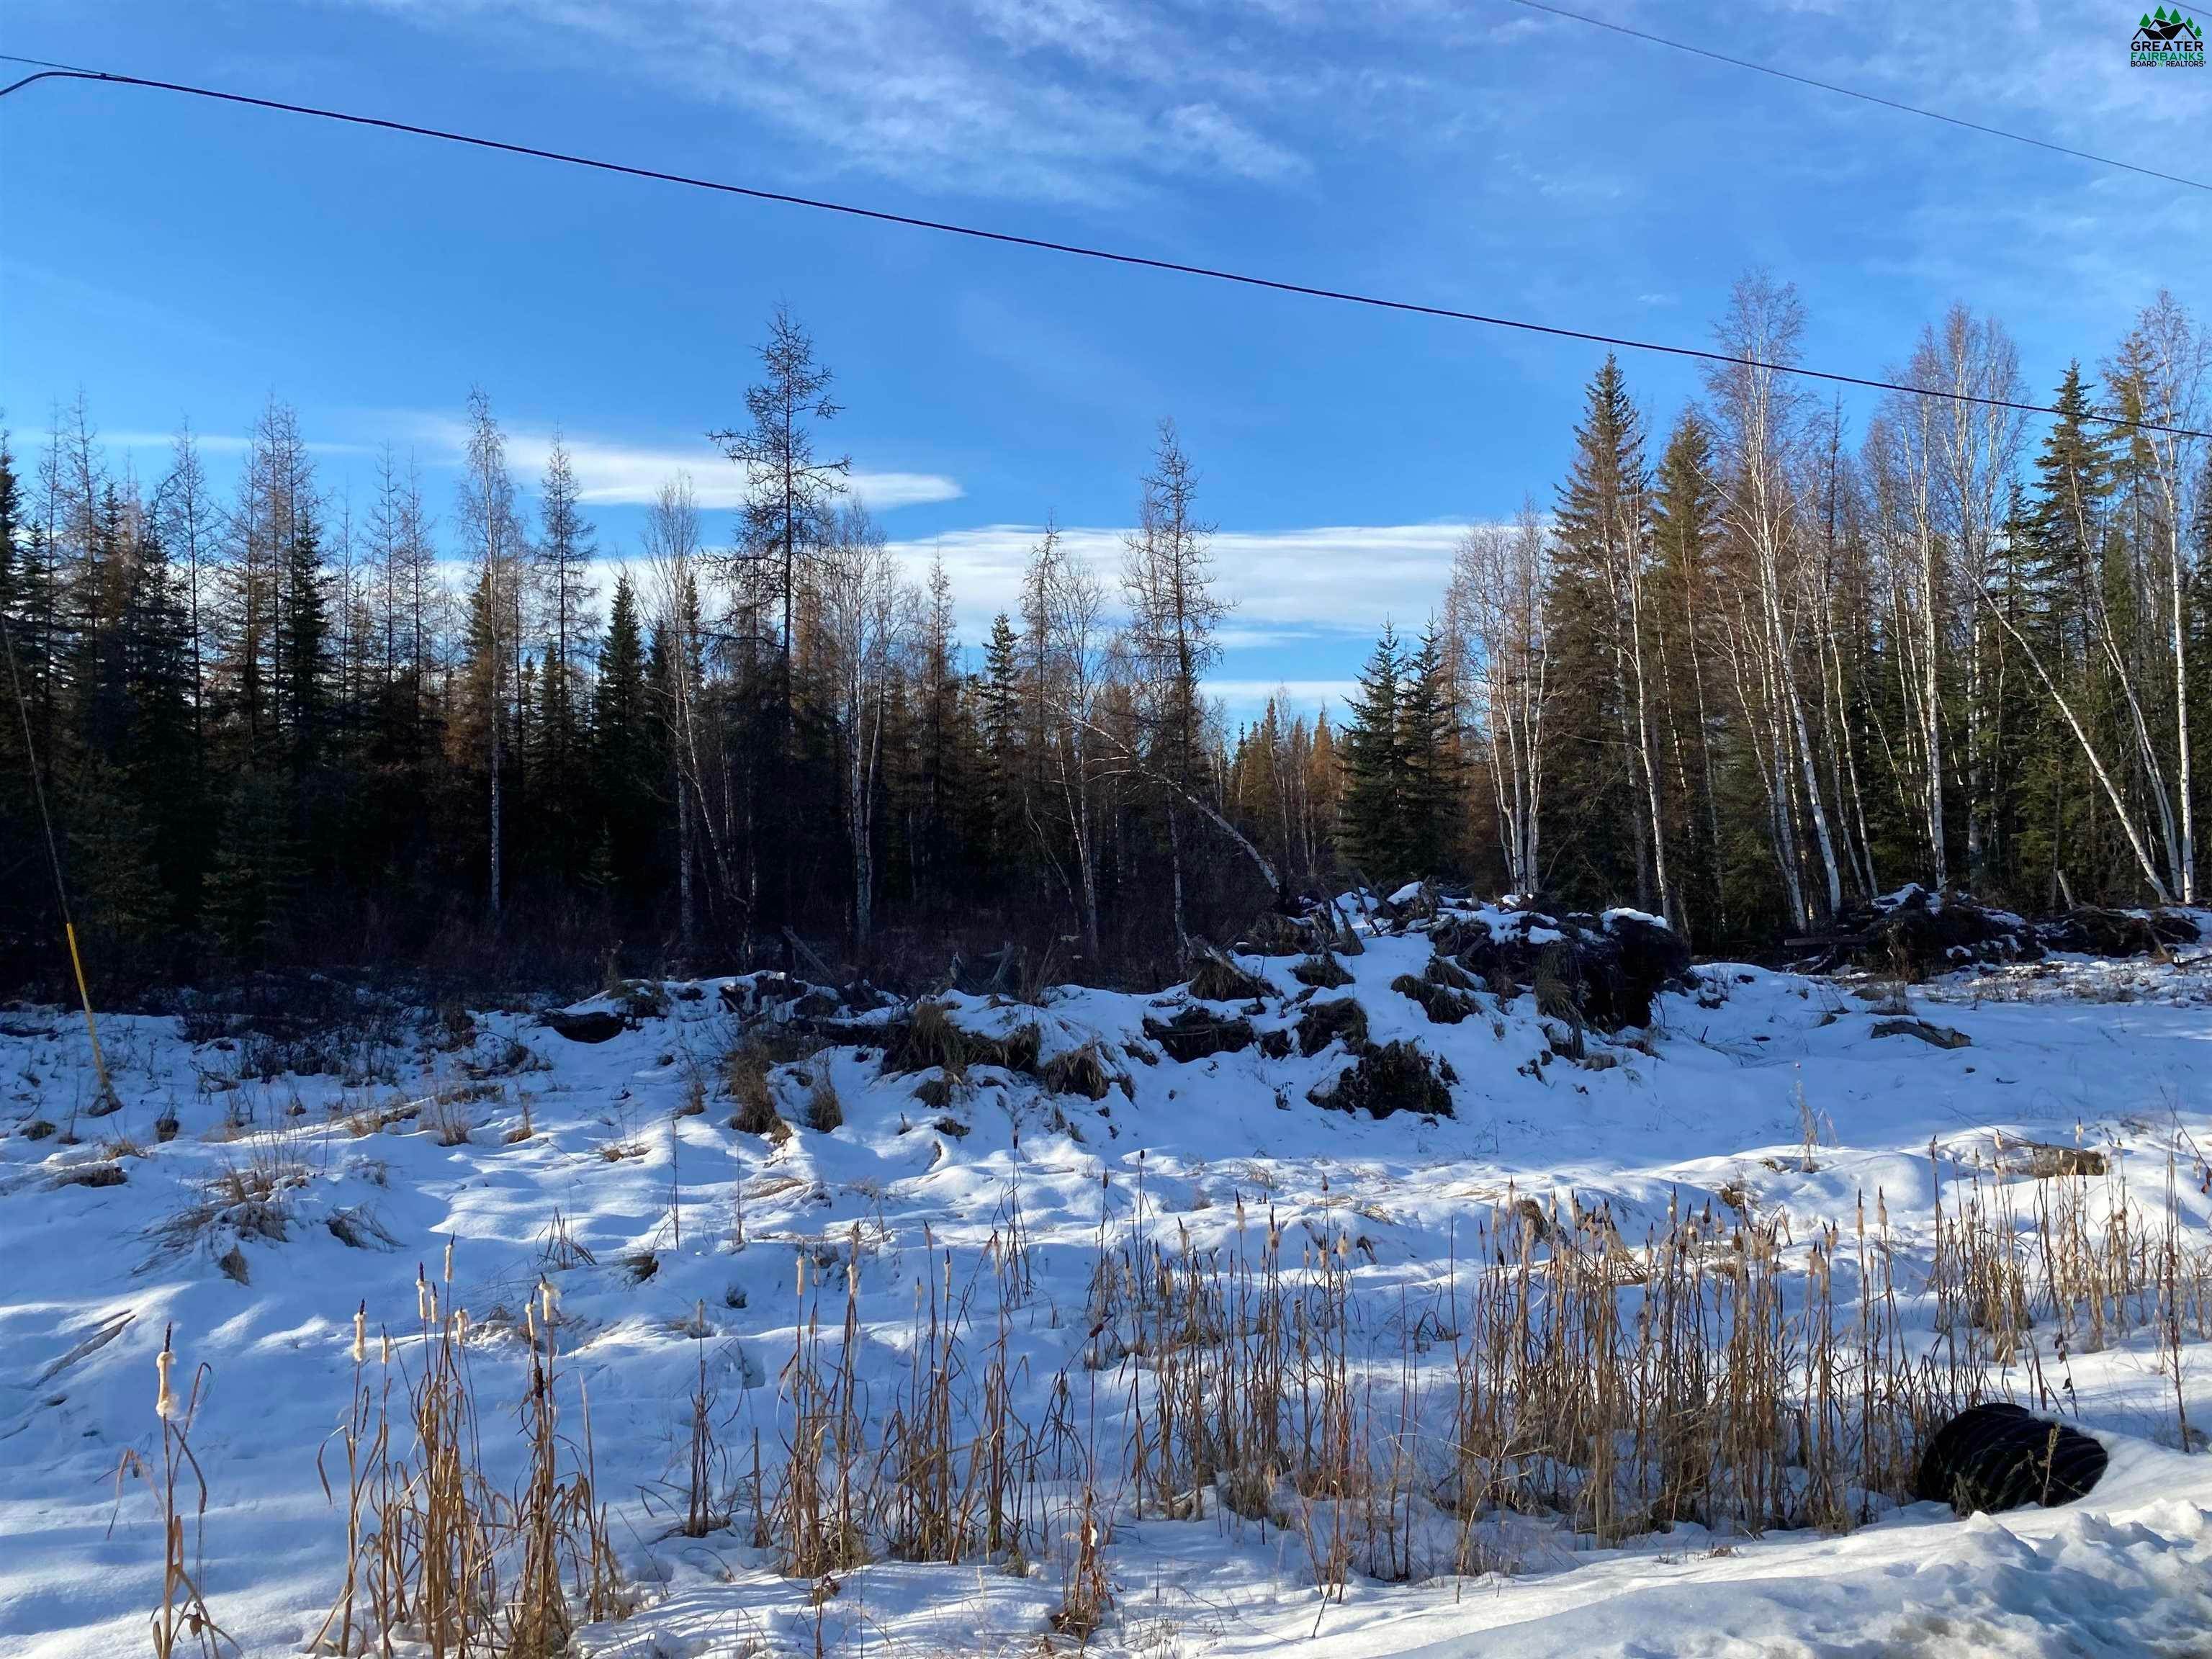 8. Residential for Sale at L7 DALLAS DRIVE North Pole, Alaska 99705 United States